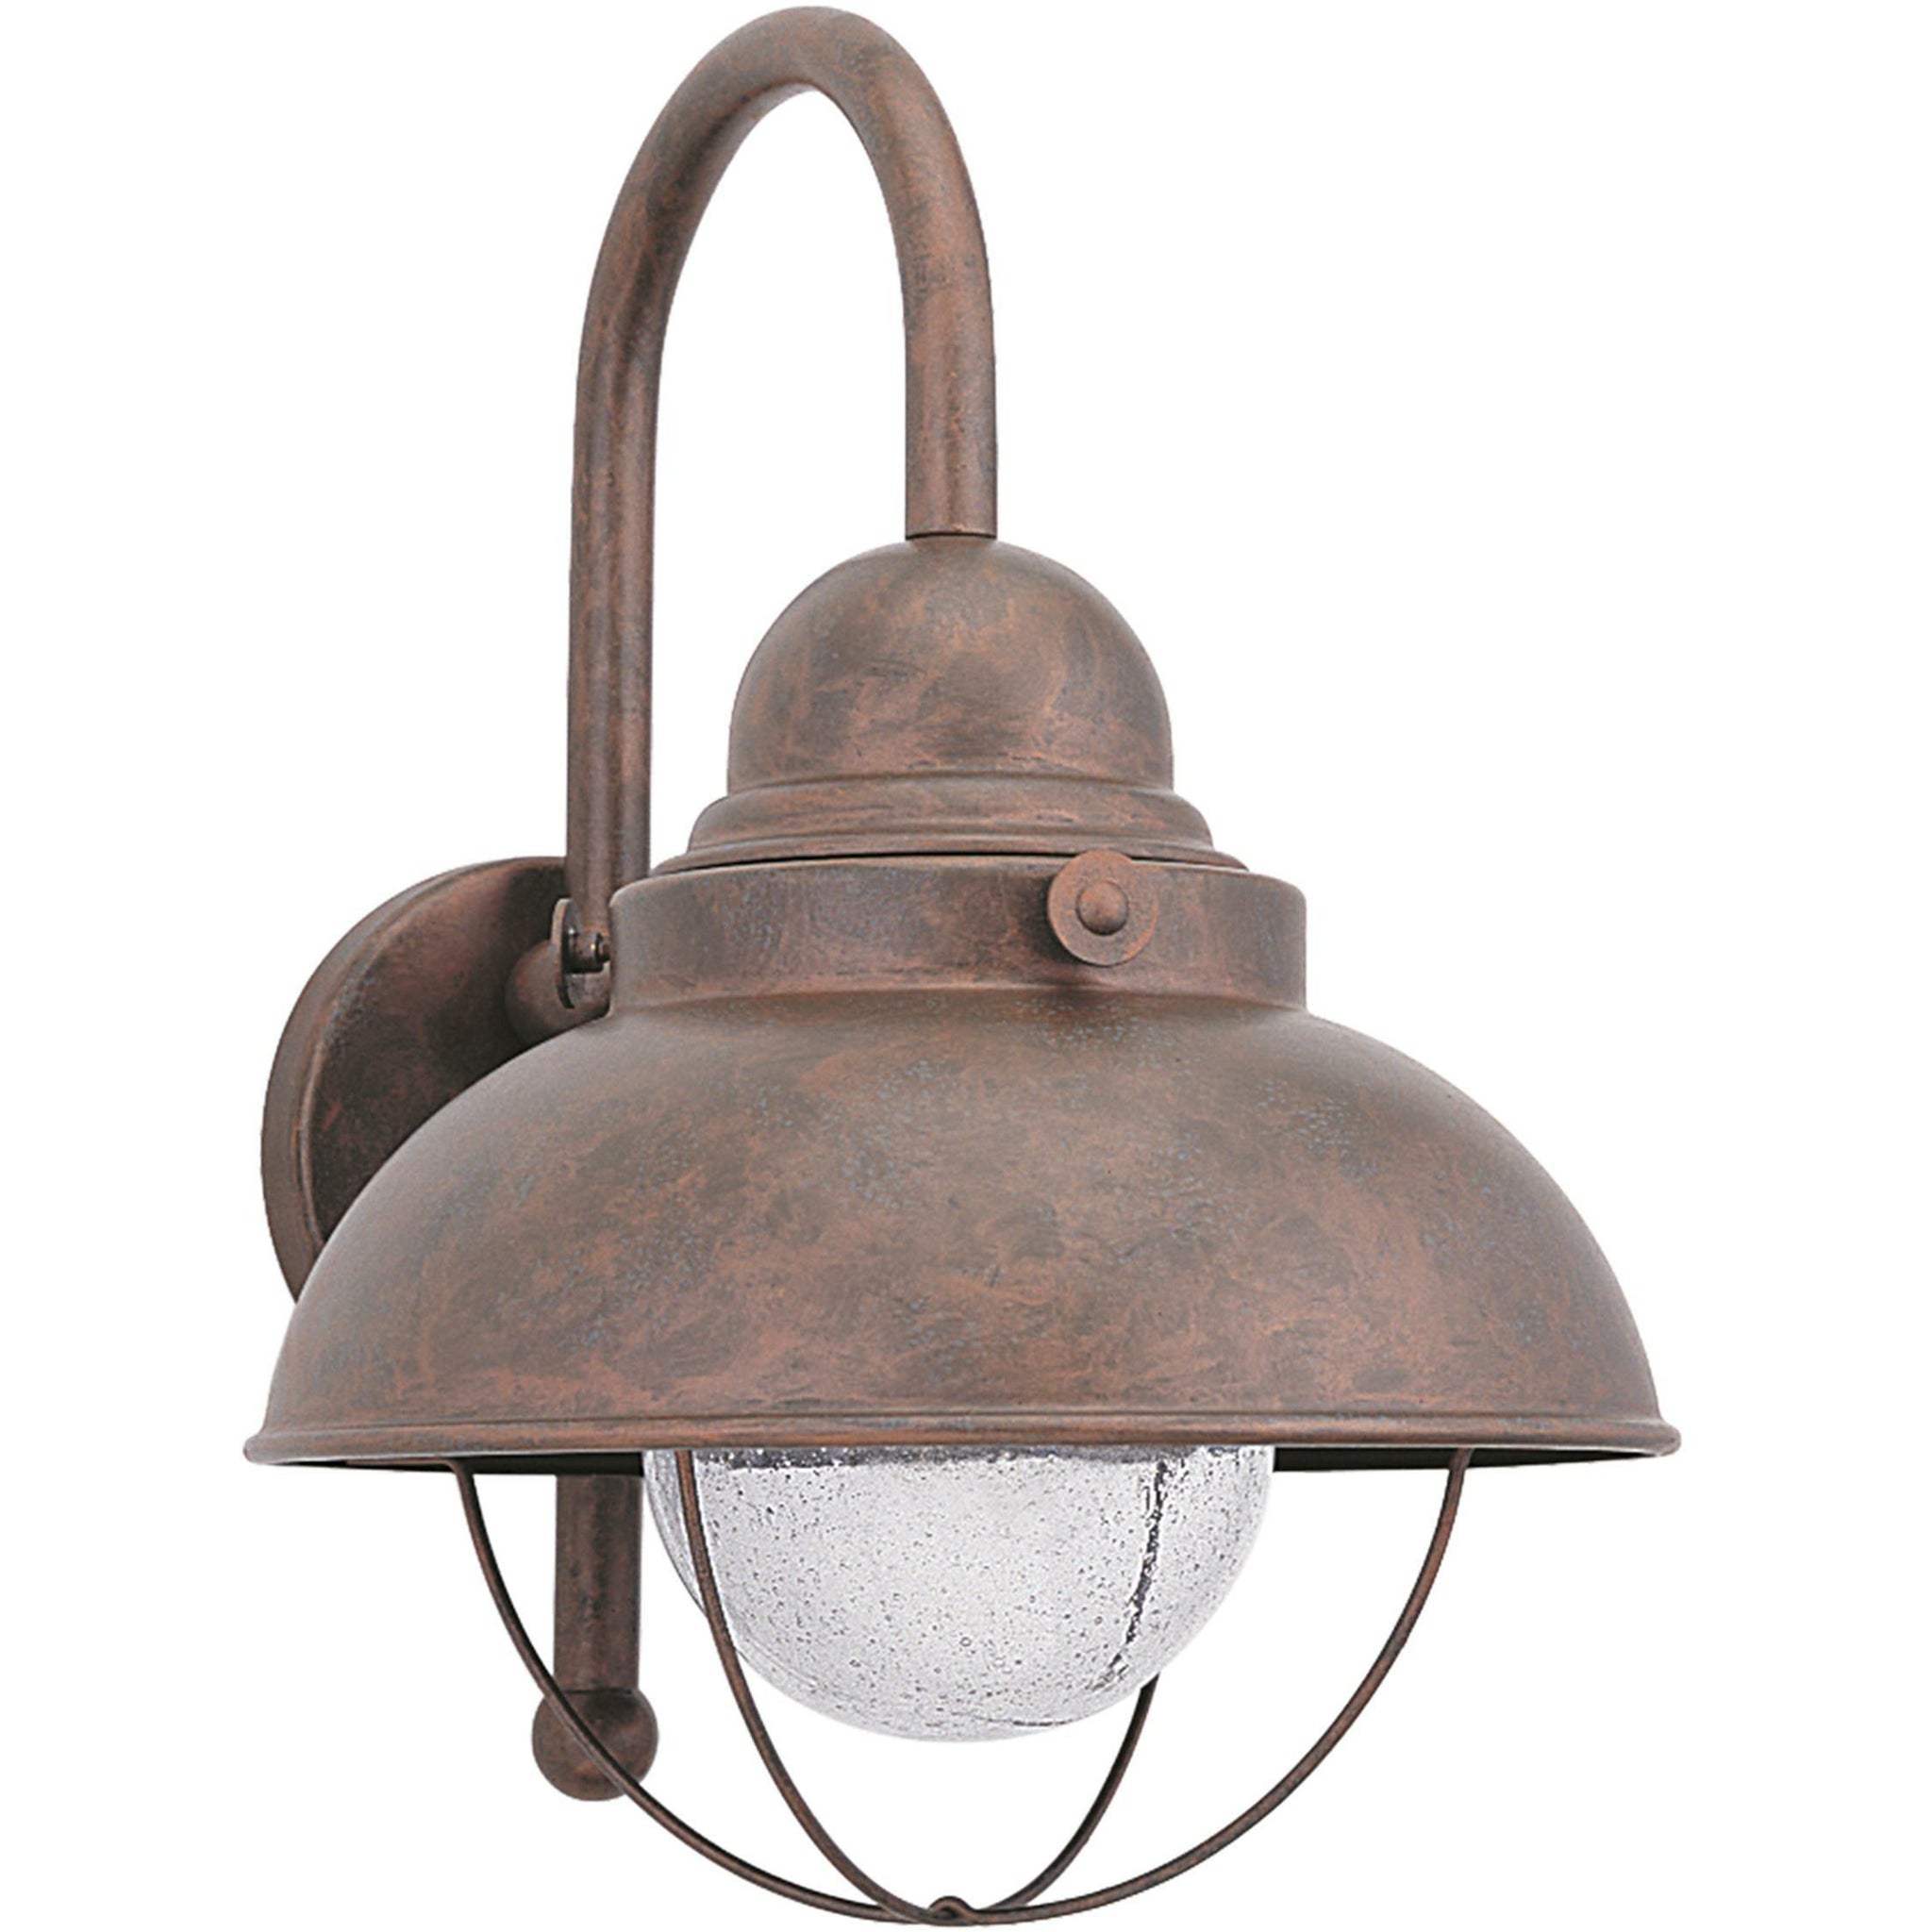 Sebring Outdoor Wall Light Weathered Copper